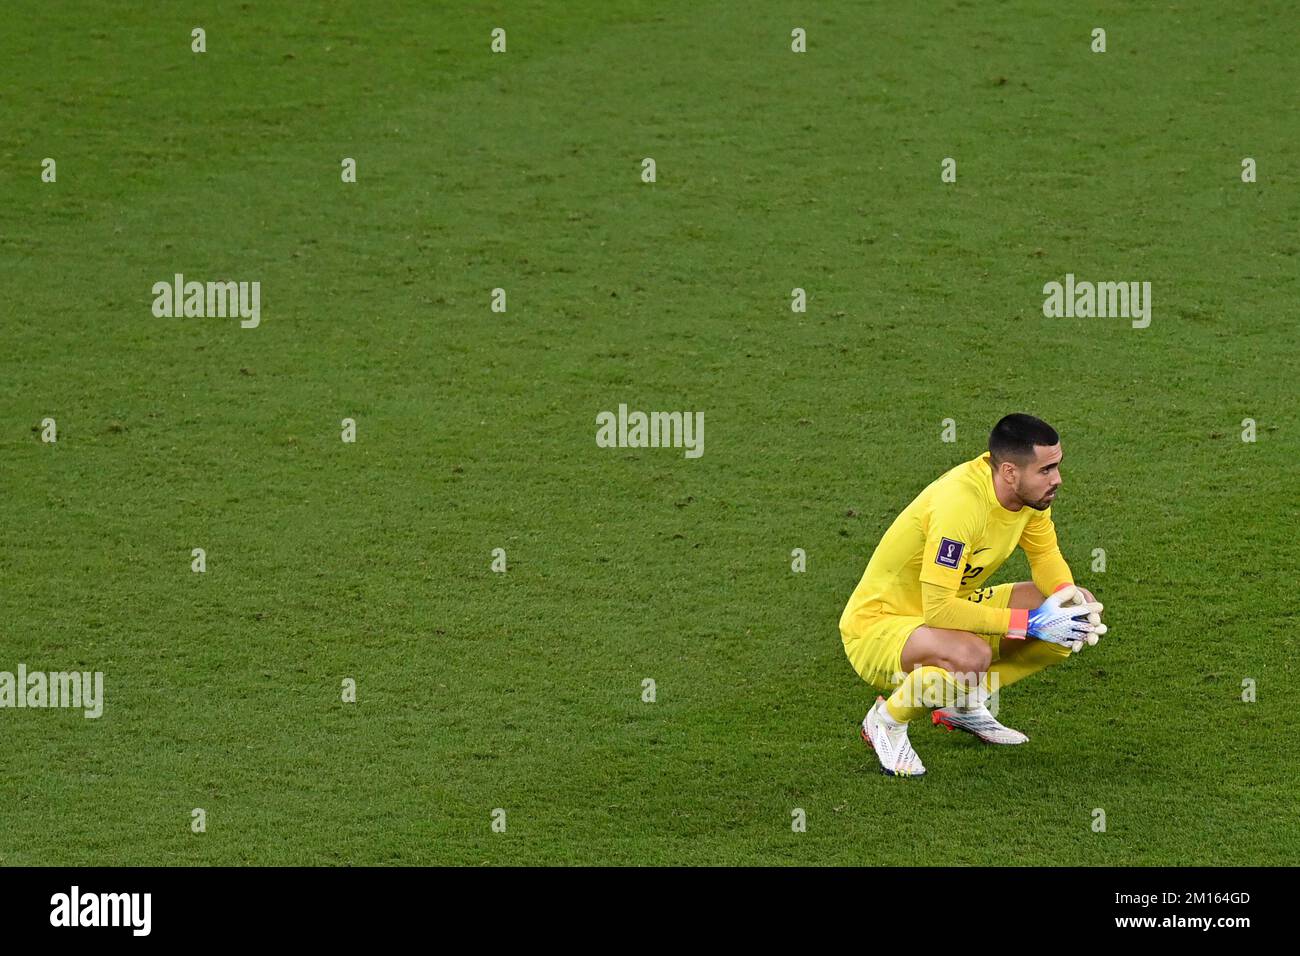 Doha, Qatar. 10th Dec, 2022. Diogo Costa, goalkeeper of Portugal, reacts during the Quarterfinal between Morocco and Portugal of the 2022 FIFA World Cup at Al Thumama Stadium in Doha, Qatar, Dec. 10, 2022. Credit: Li Jundong/Xinhua/Alamy Live News Stock Photo